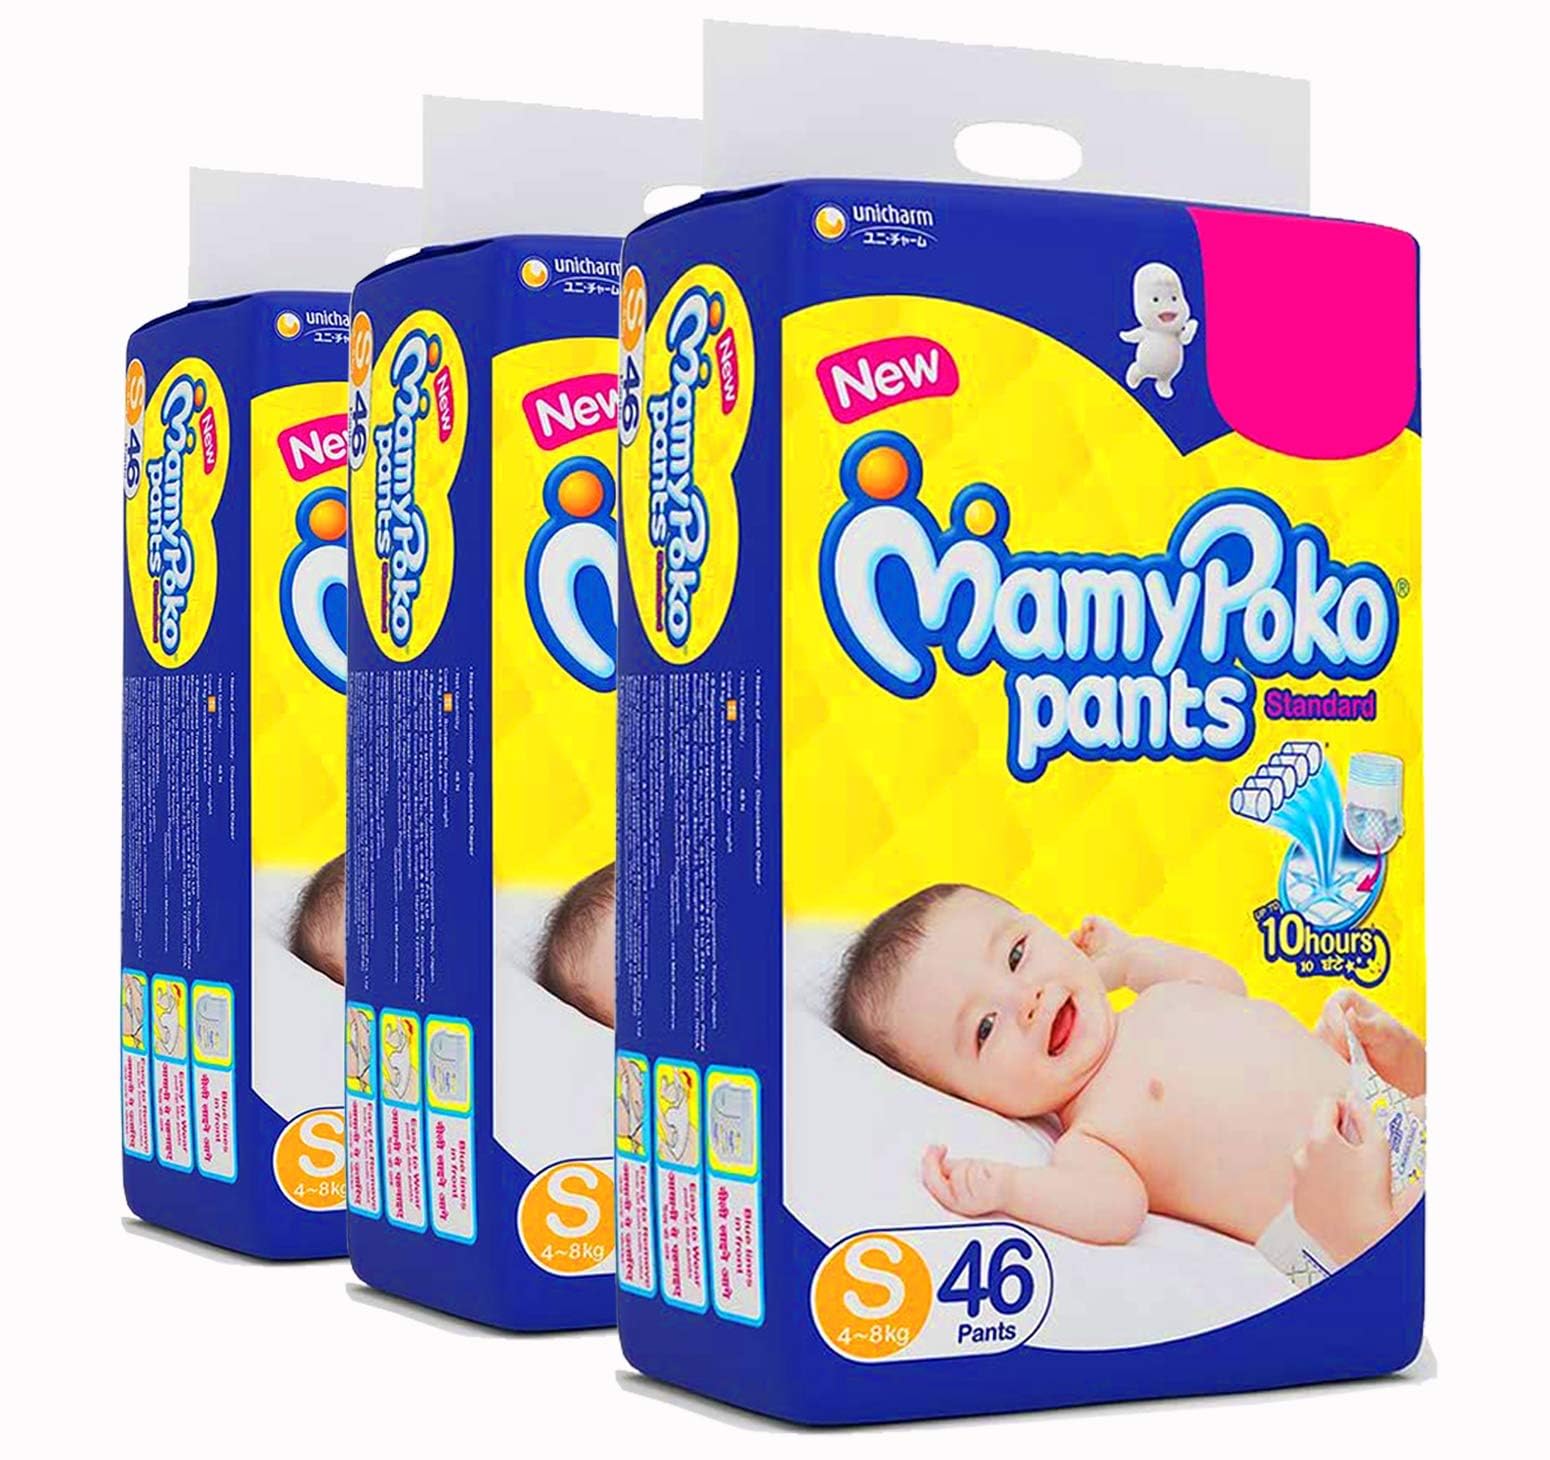 Mamypoko Diaper Pants Standard Style, Size Small, 4-8 Kg (46 Counts), Pack of 3